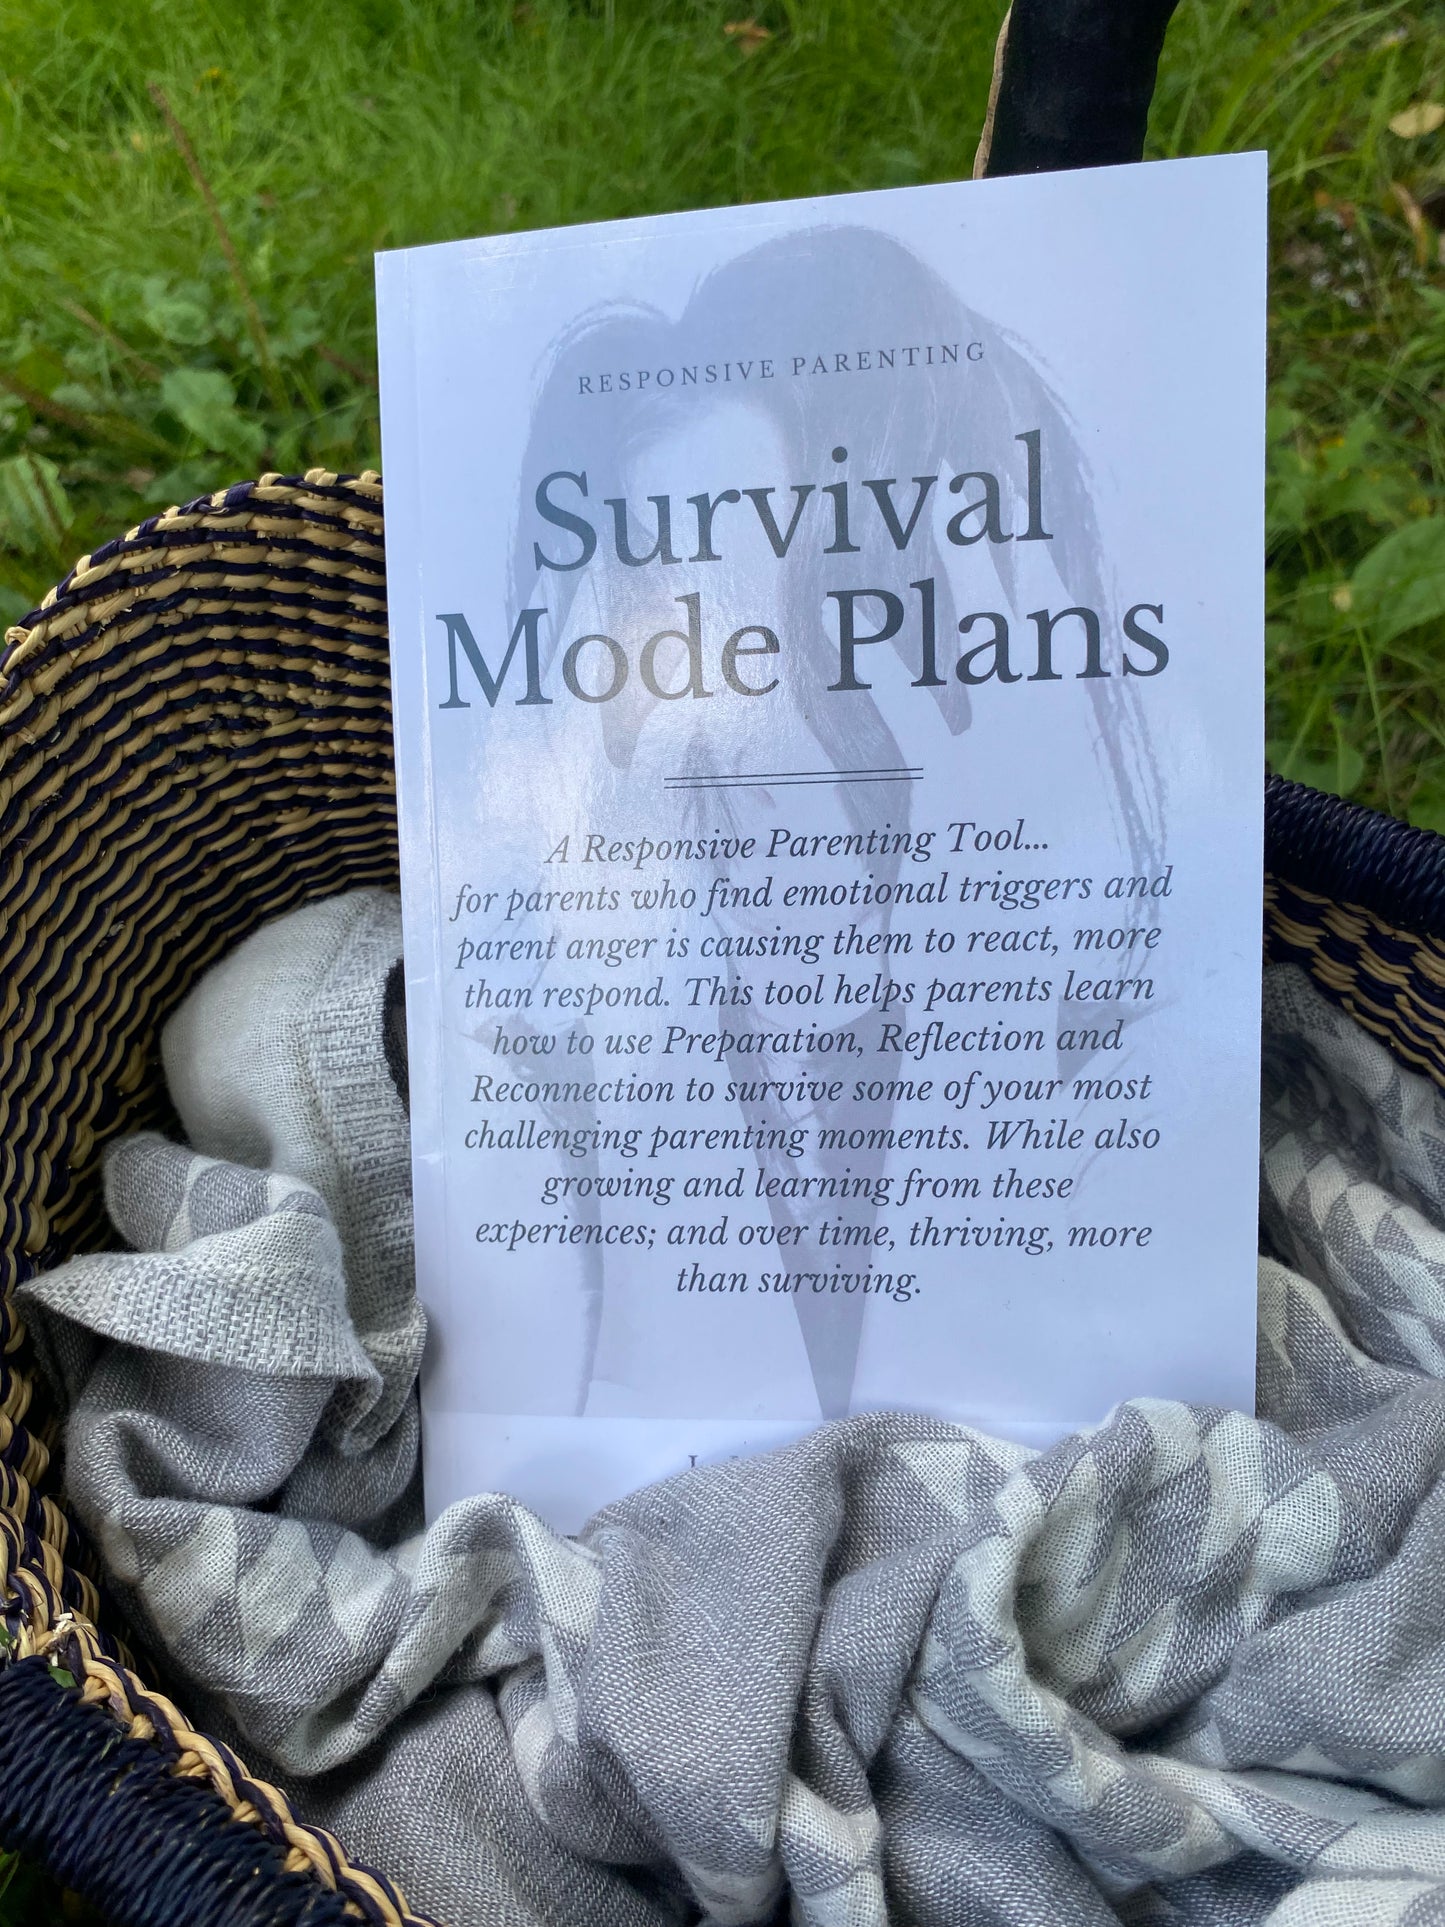 A Guide to Survival Mode Plans